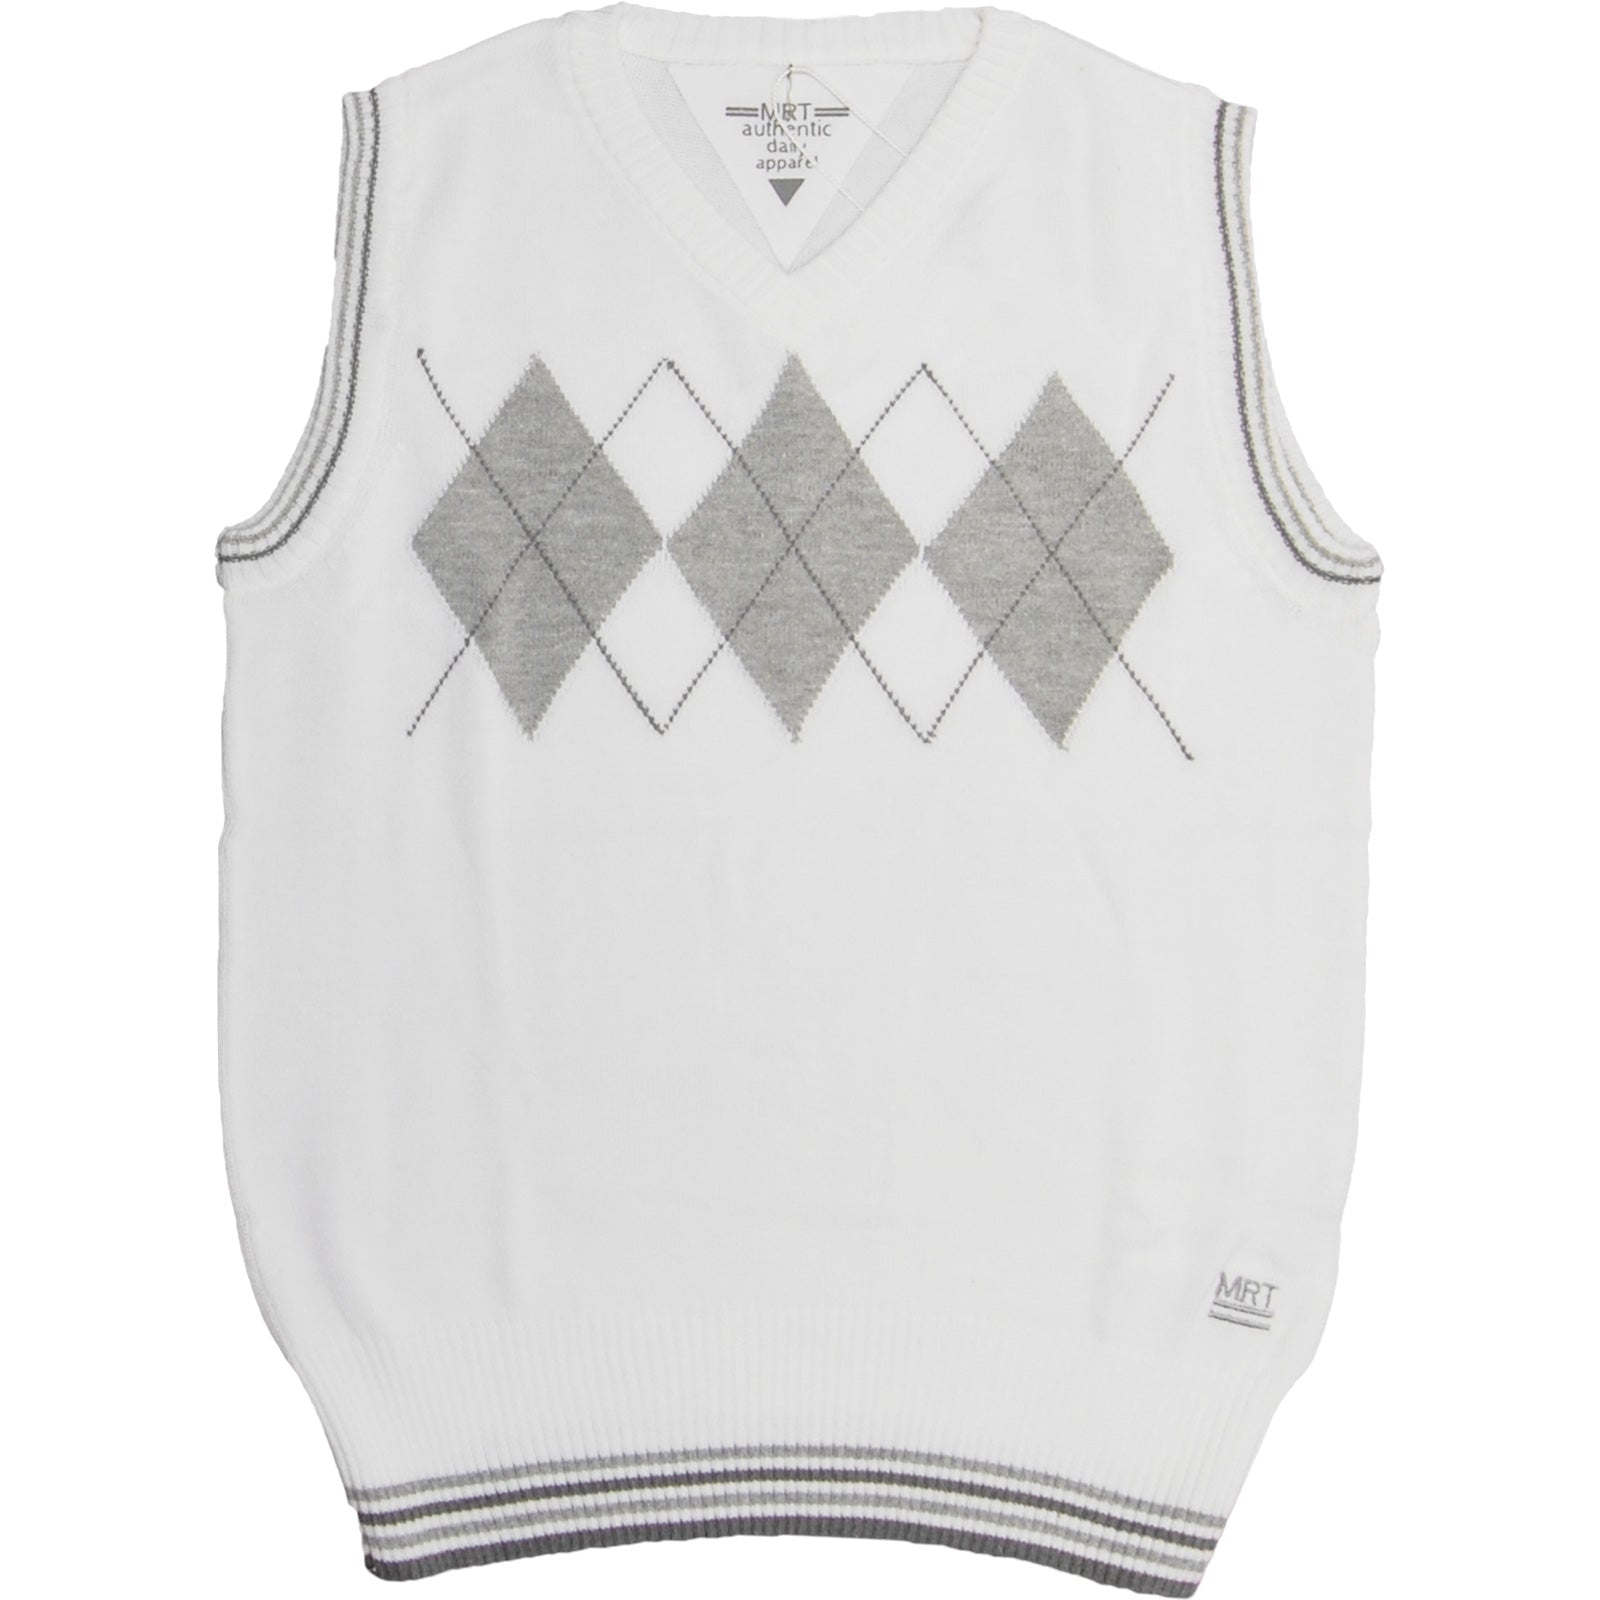 
  Tricot vest from the Mirtillo children's clothing line with rhombus patterned v-neck on a whit...